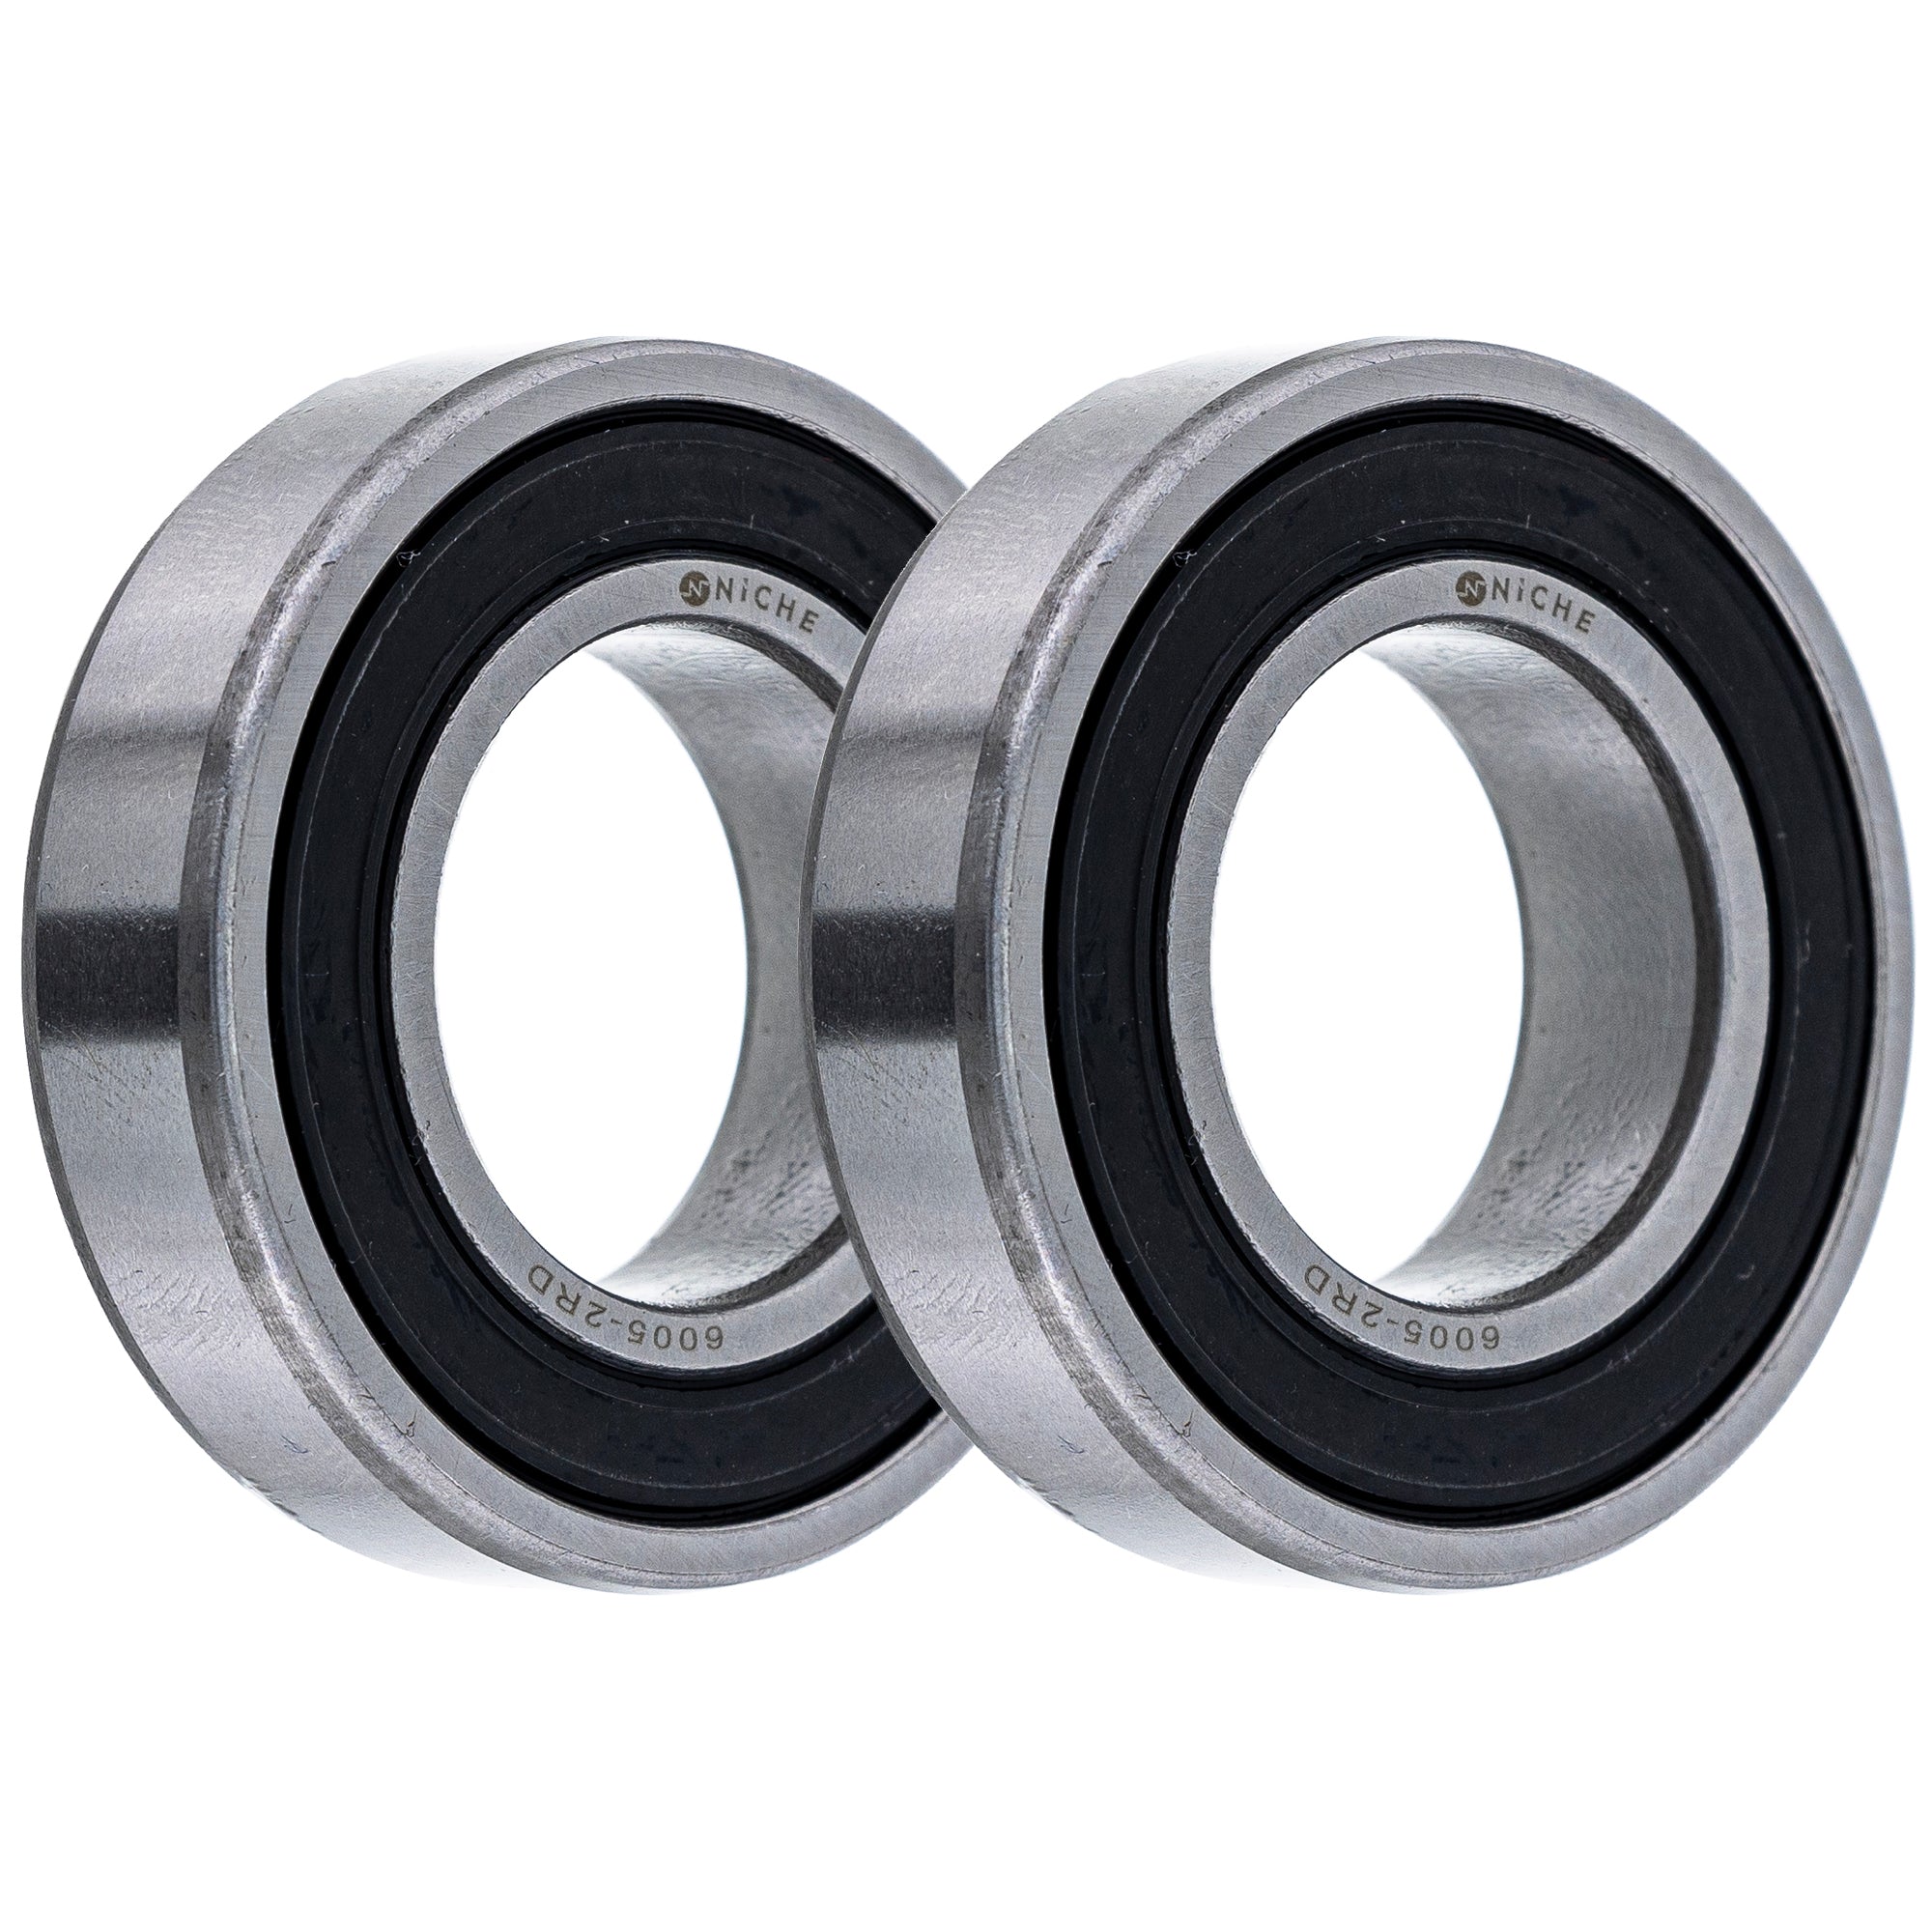 Electric Grade, Single Row, Deep Groove, Ball Bearing Pack of 2 2-Pack for zOTHER RC51 Pro NICHE 519-CBB2339R